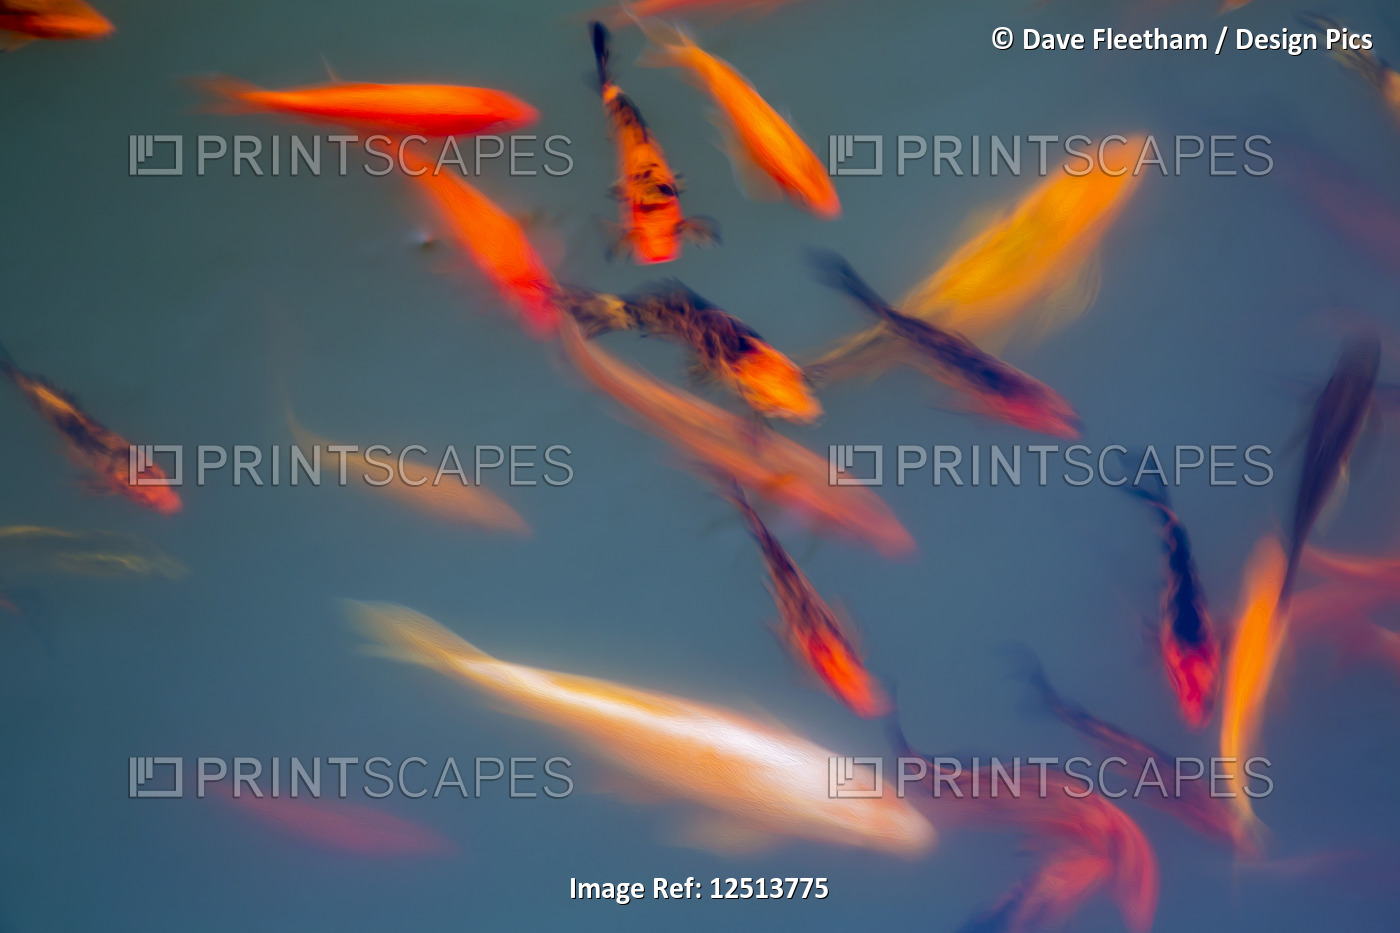 A motion blurred image of Ornamental Koi fish (Cyprinus carpio) at one of the ...